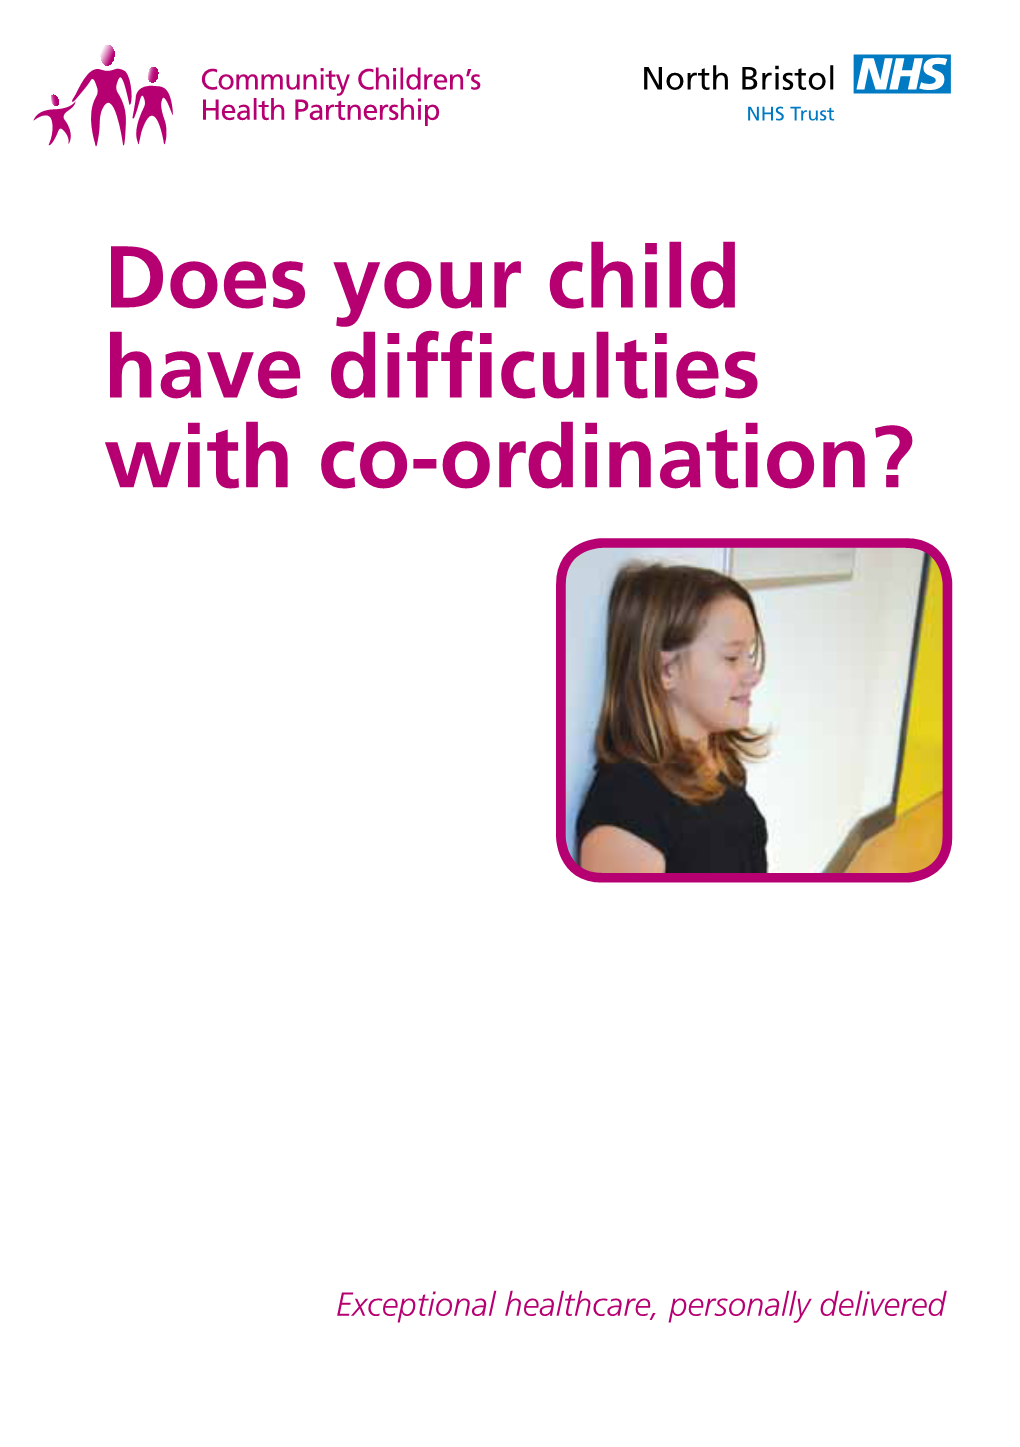 Does Your Child Have Difficulties with Co-Ordination?